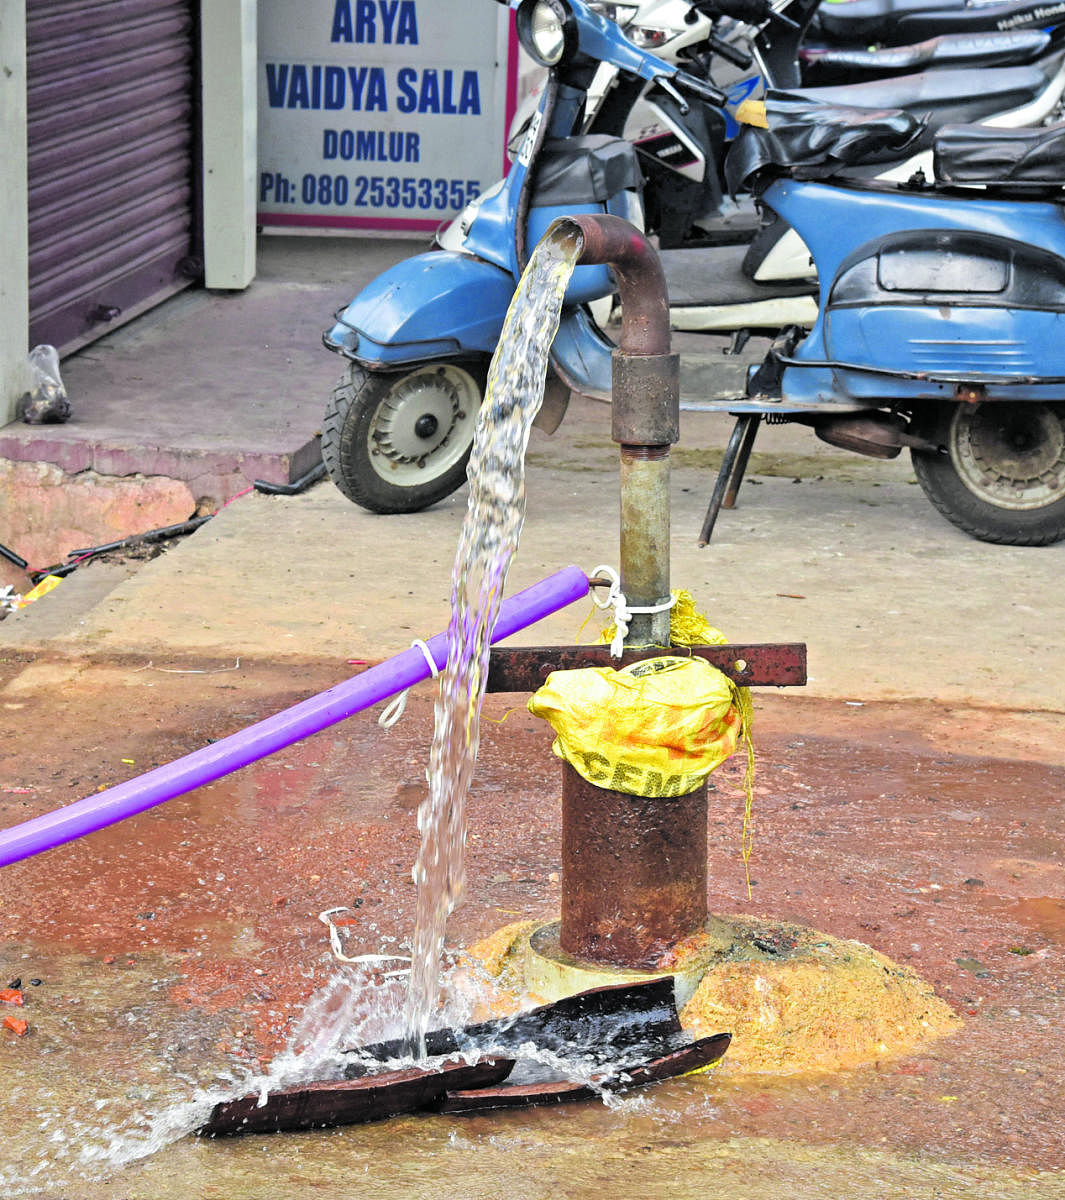 Borewell water pumping out at Old Airport Road, Domlur in Bengaluru. DH photo/S K Dinesh